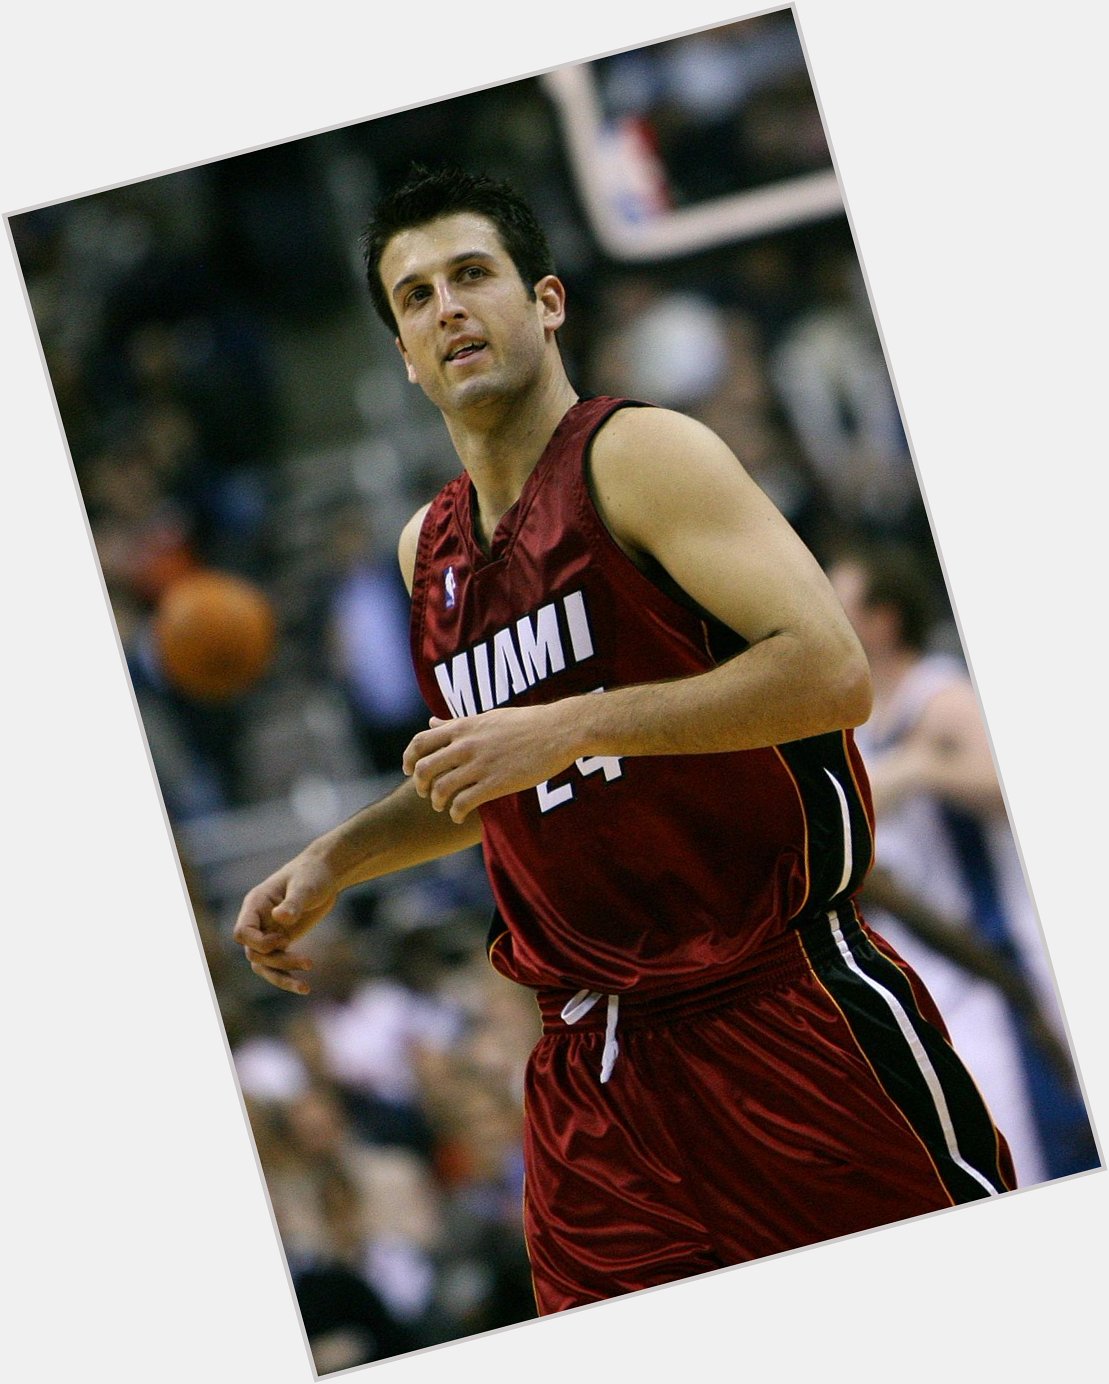 Happy 34th birthday to the one and only Jason Kapono! Congratulations! 